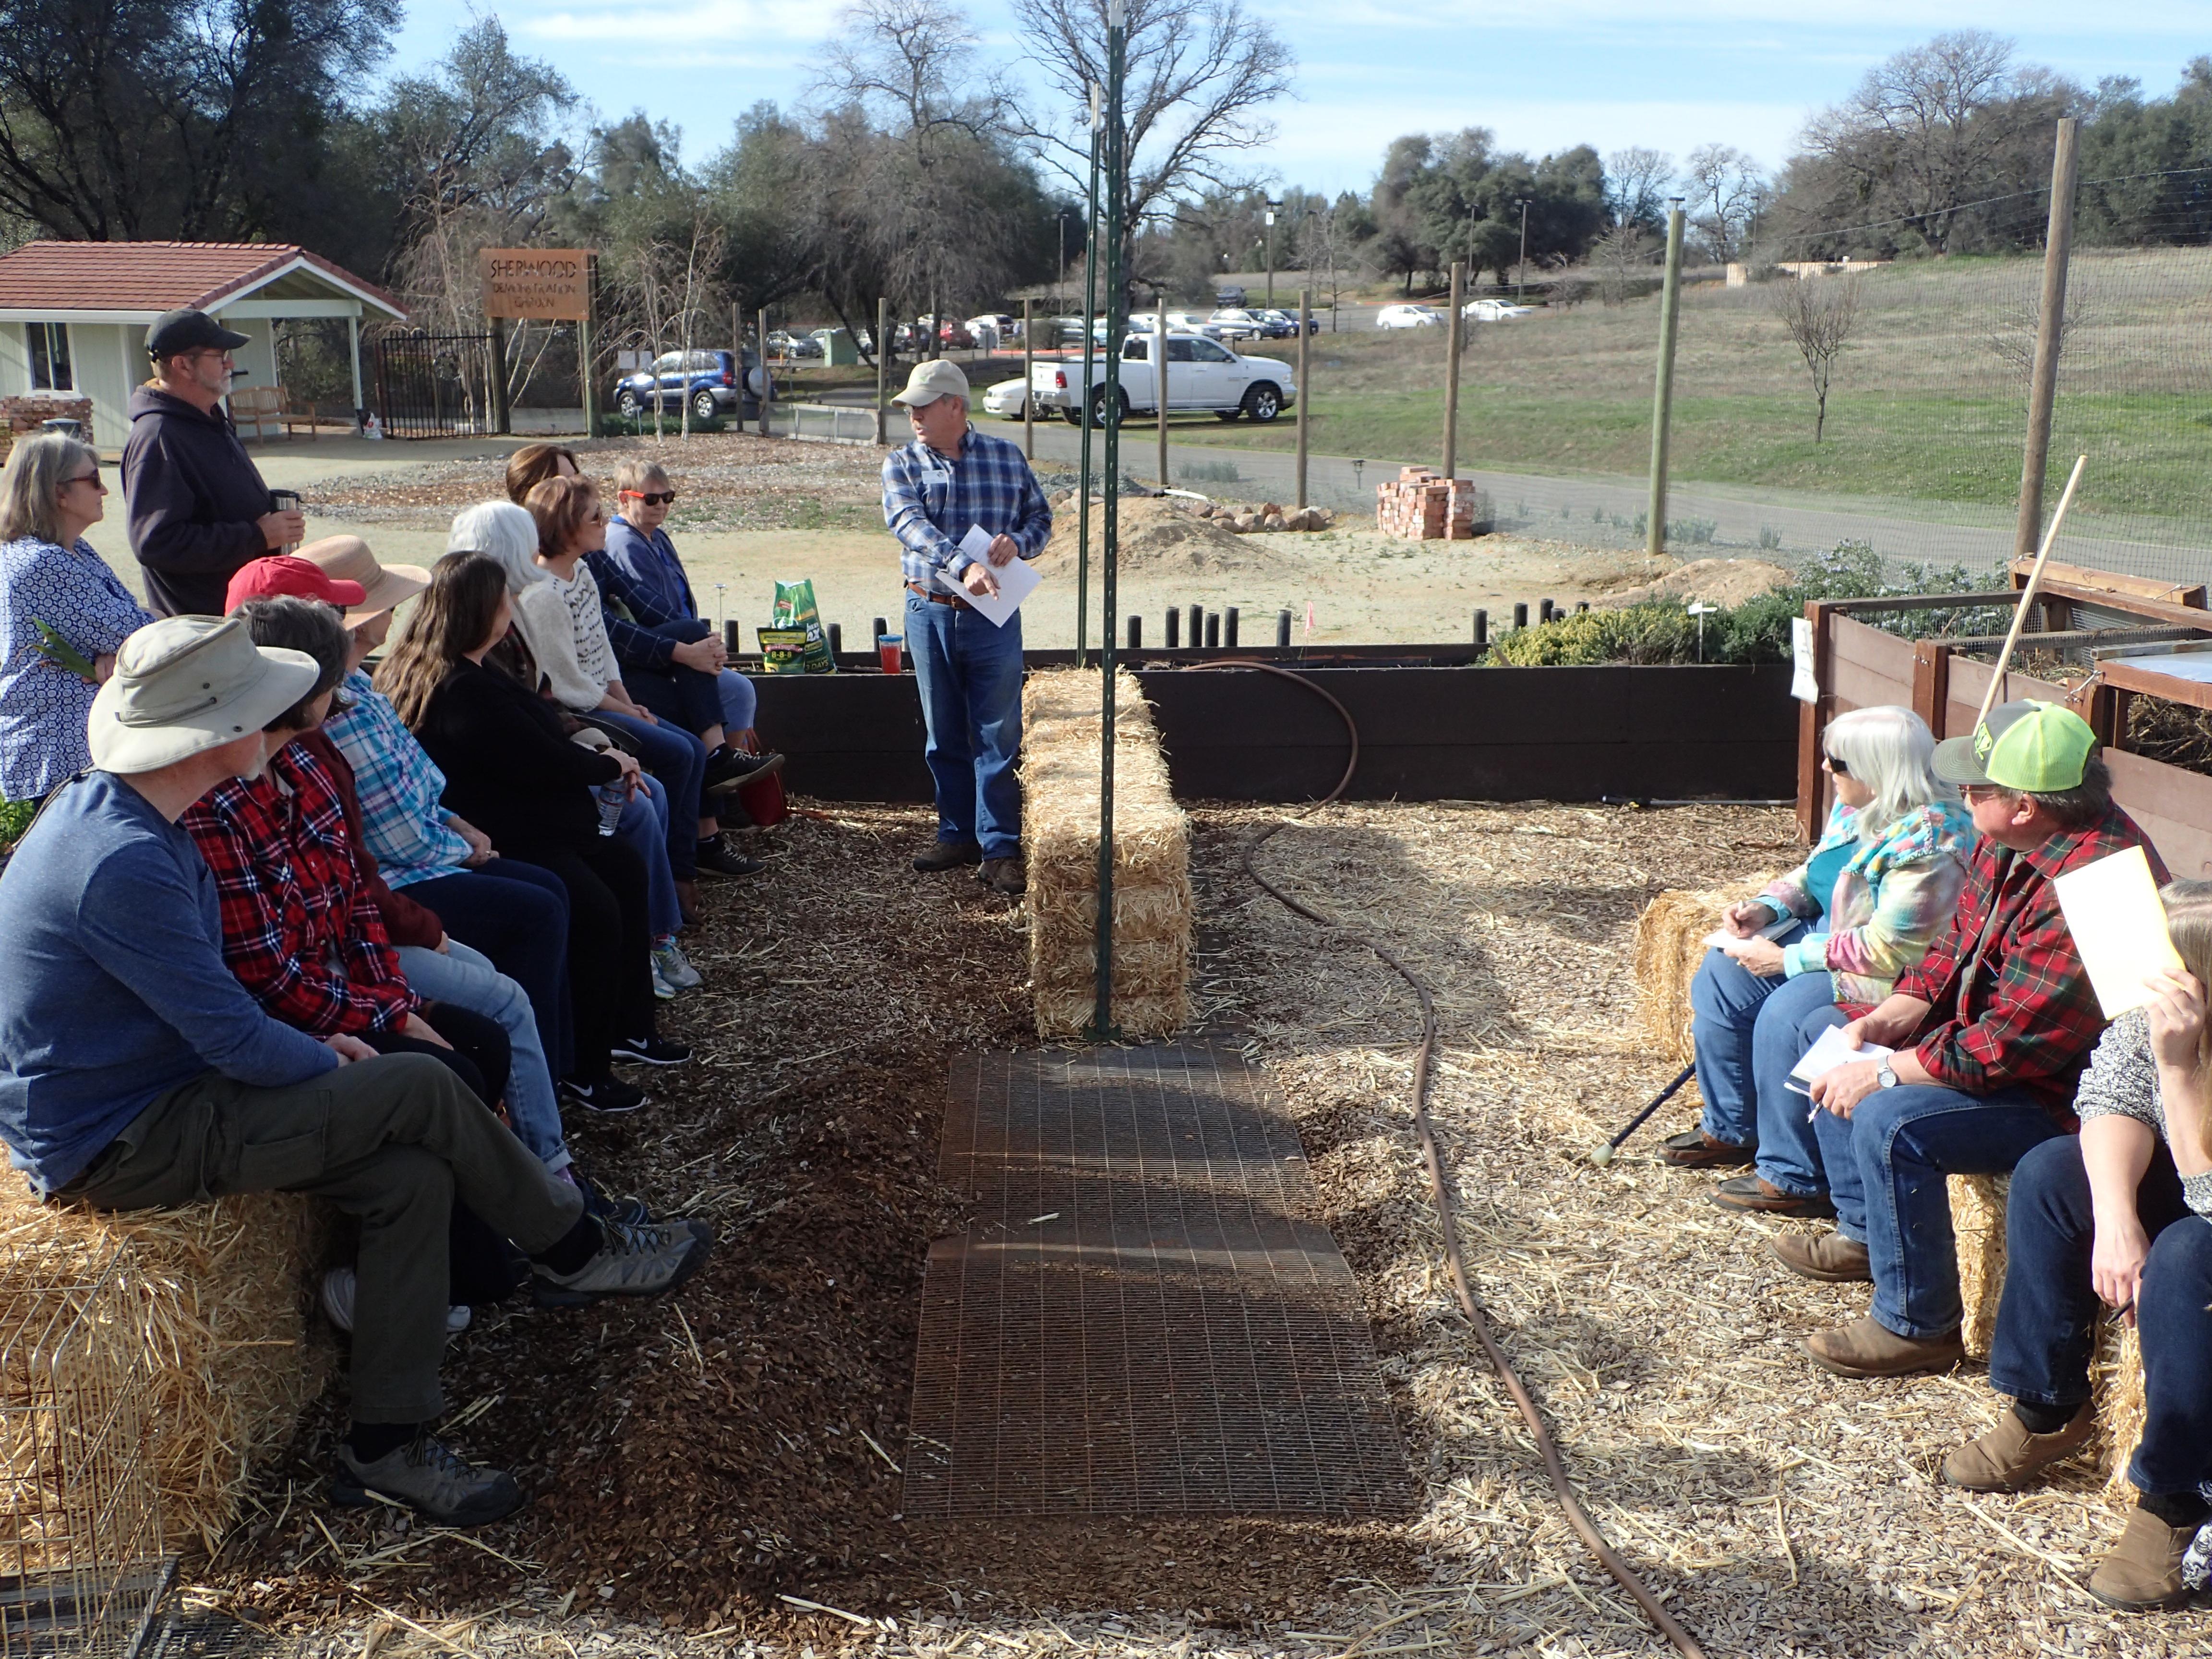 2-10-2018, First public class 'Straw Bale Gardening - Part 1'. How to get started.